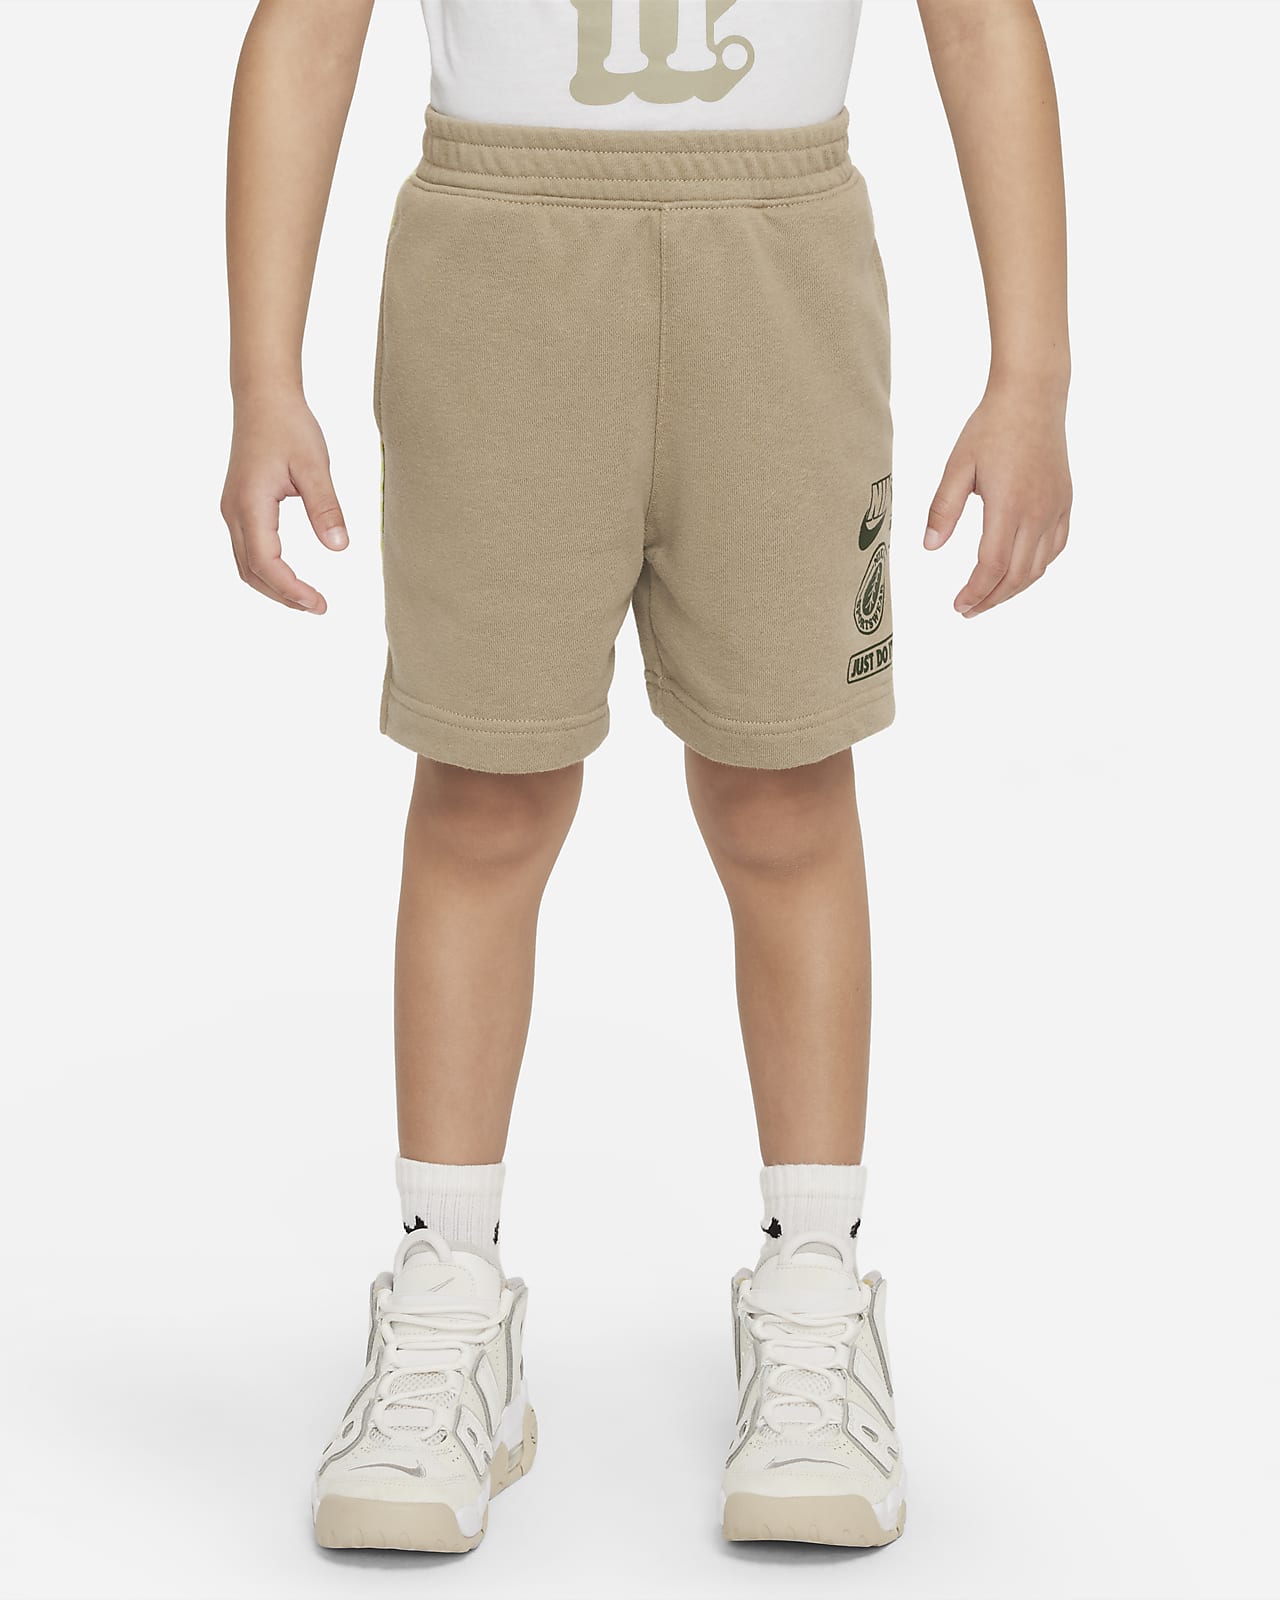 Nike Sportswear "Leave No Trace" French Terry Taping Shorts Little Kids' Shorts